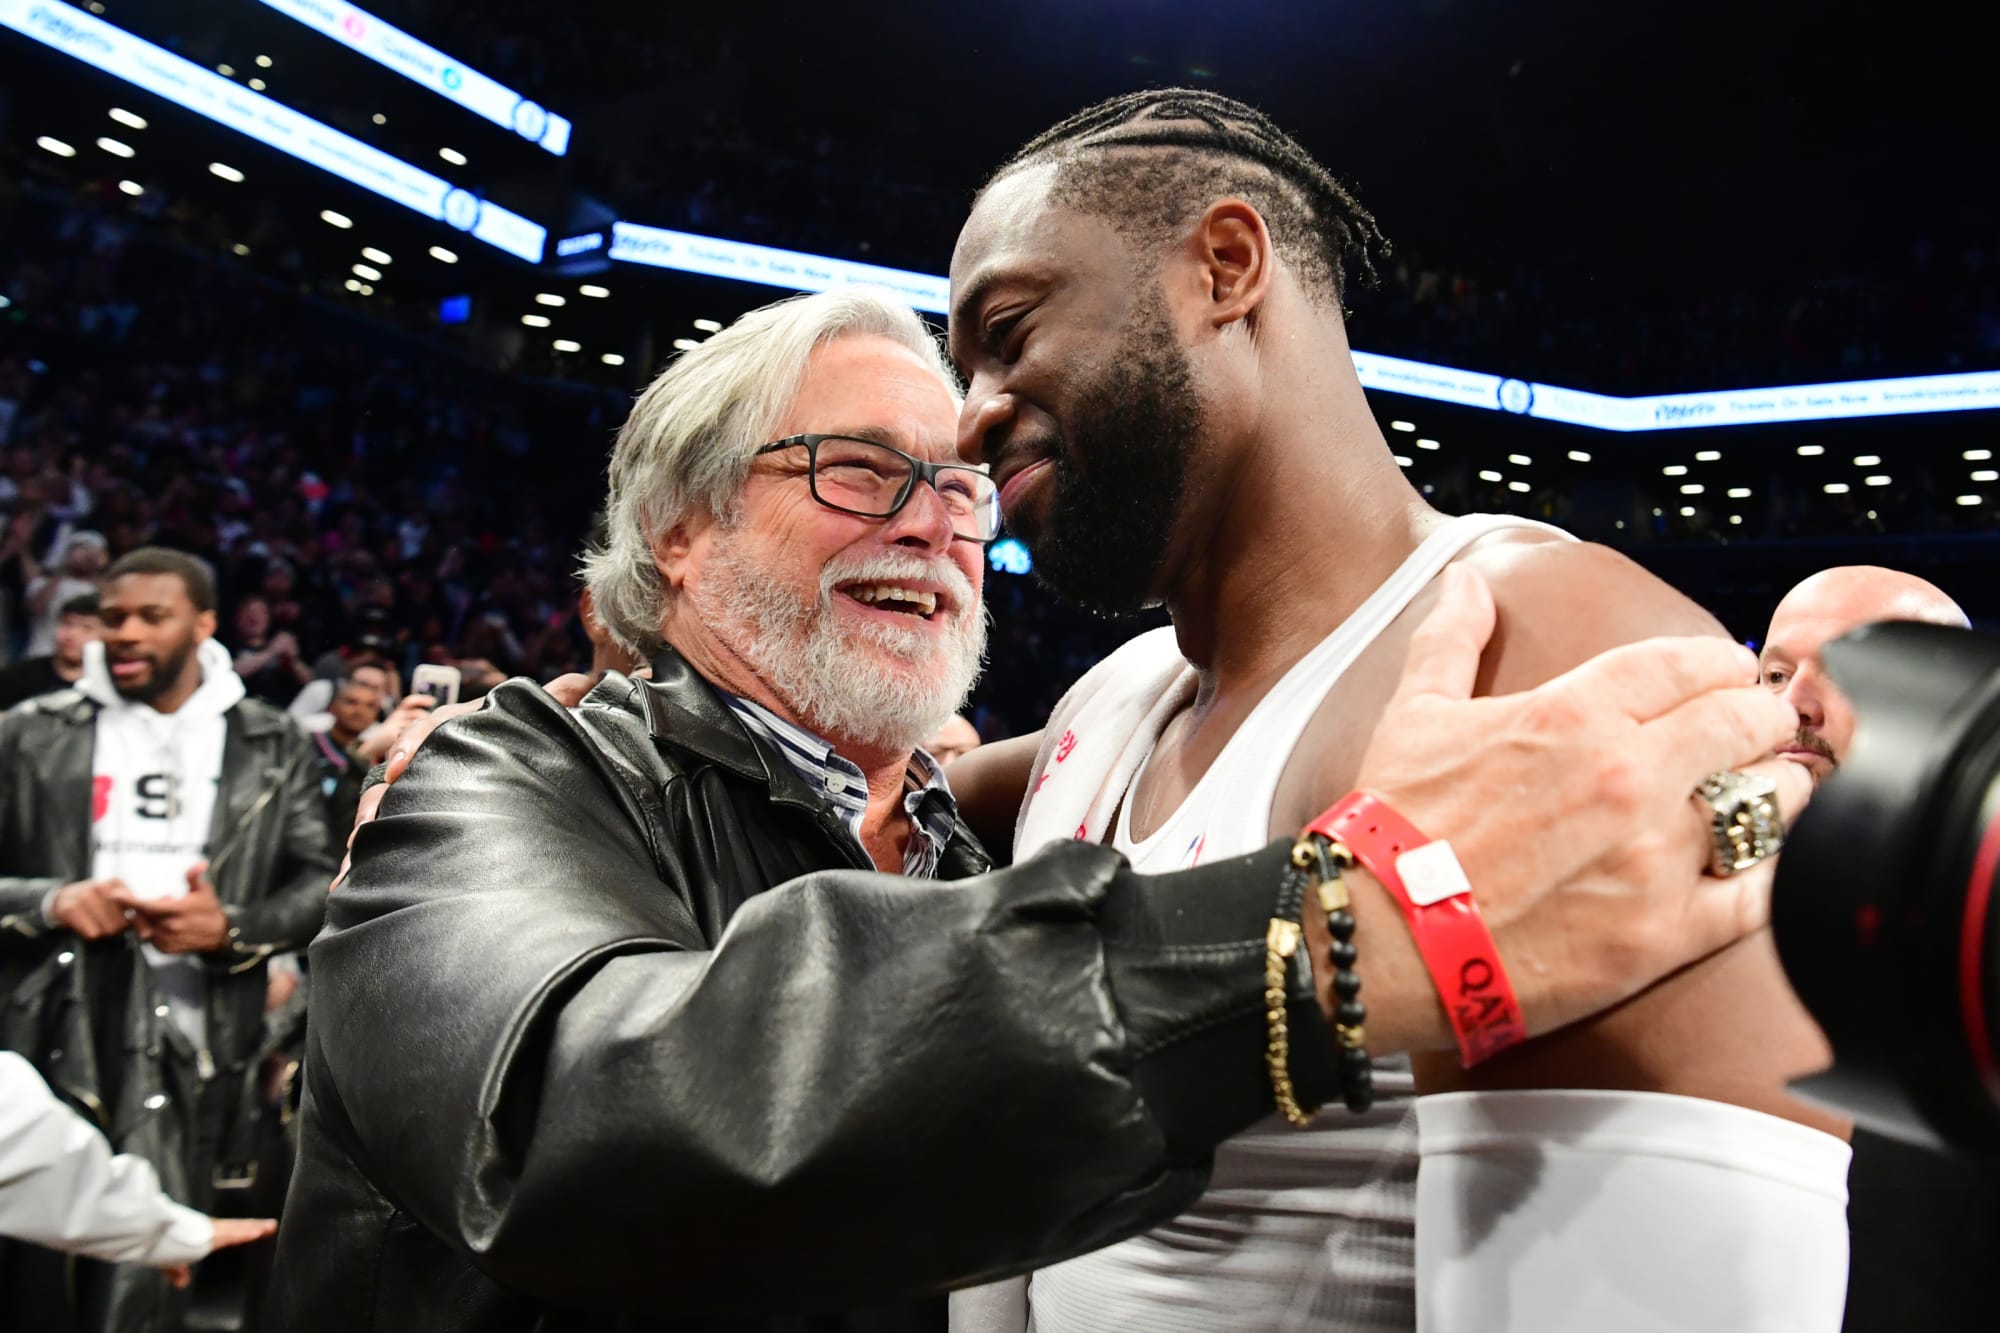 Heat Owner Micky Arison 'Disappointed' In Aspect Of Dwyane Wade